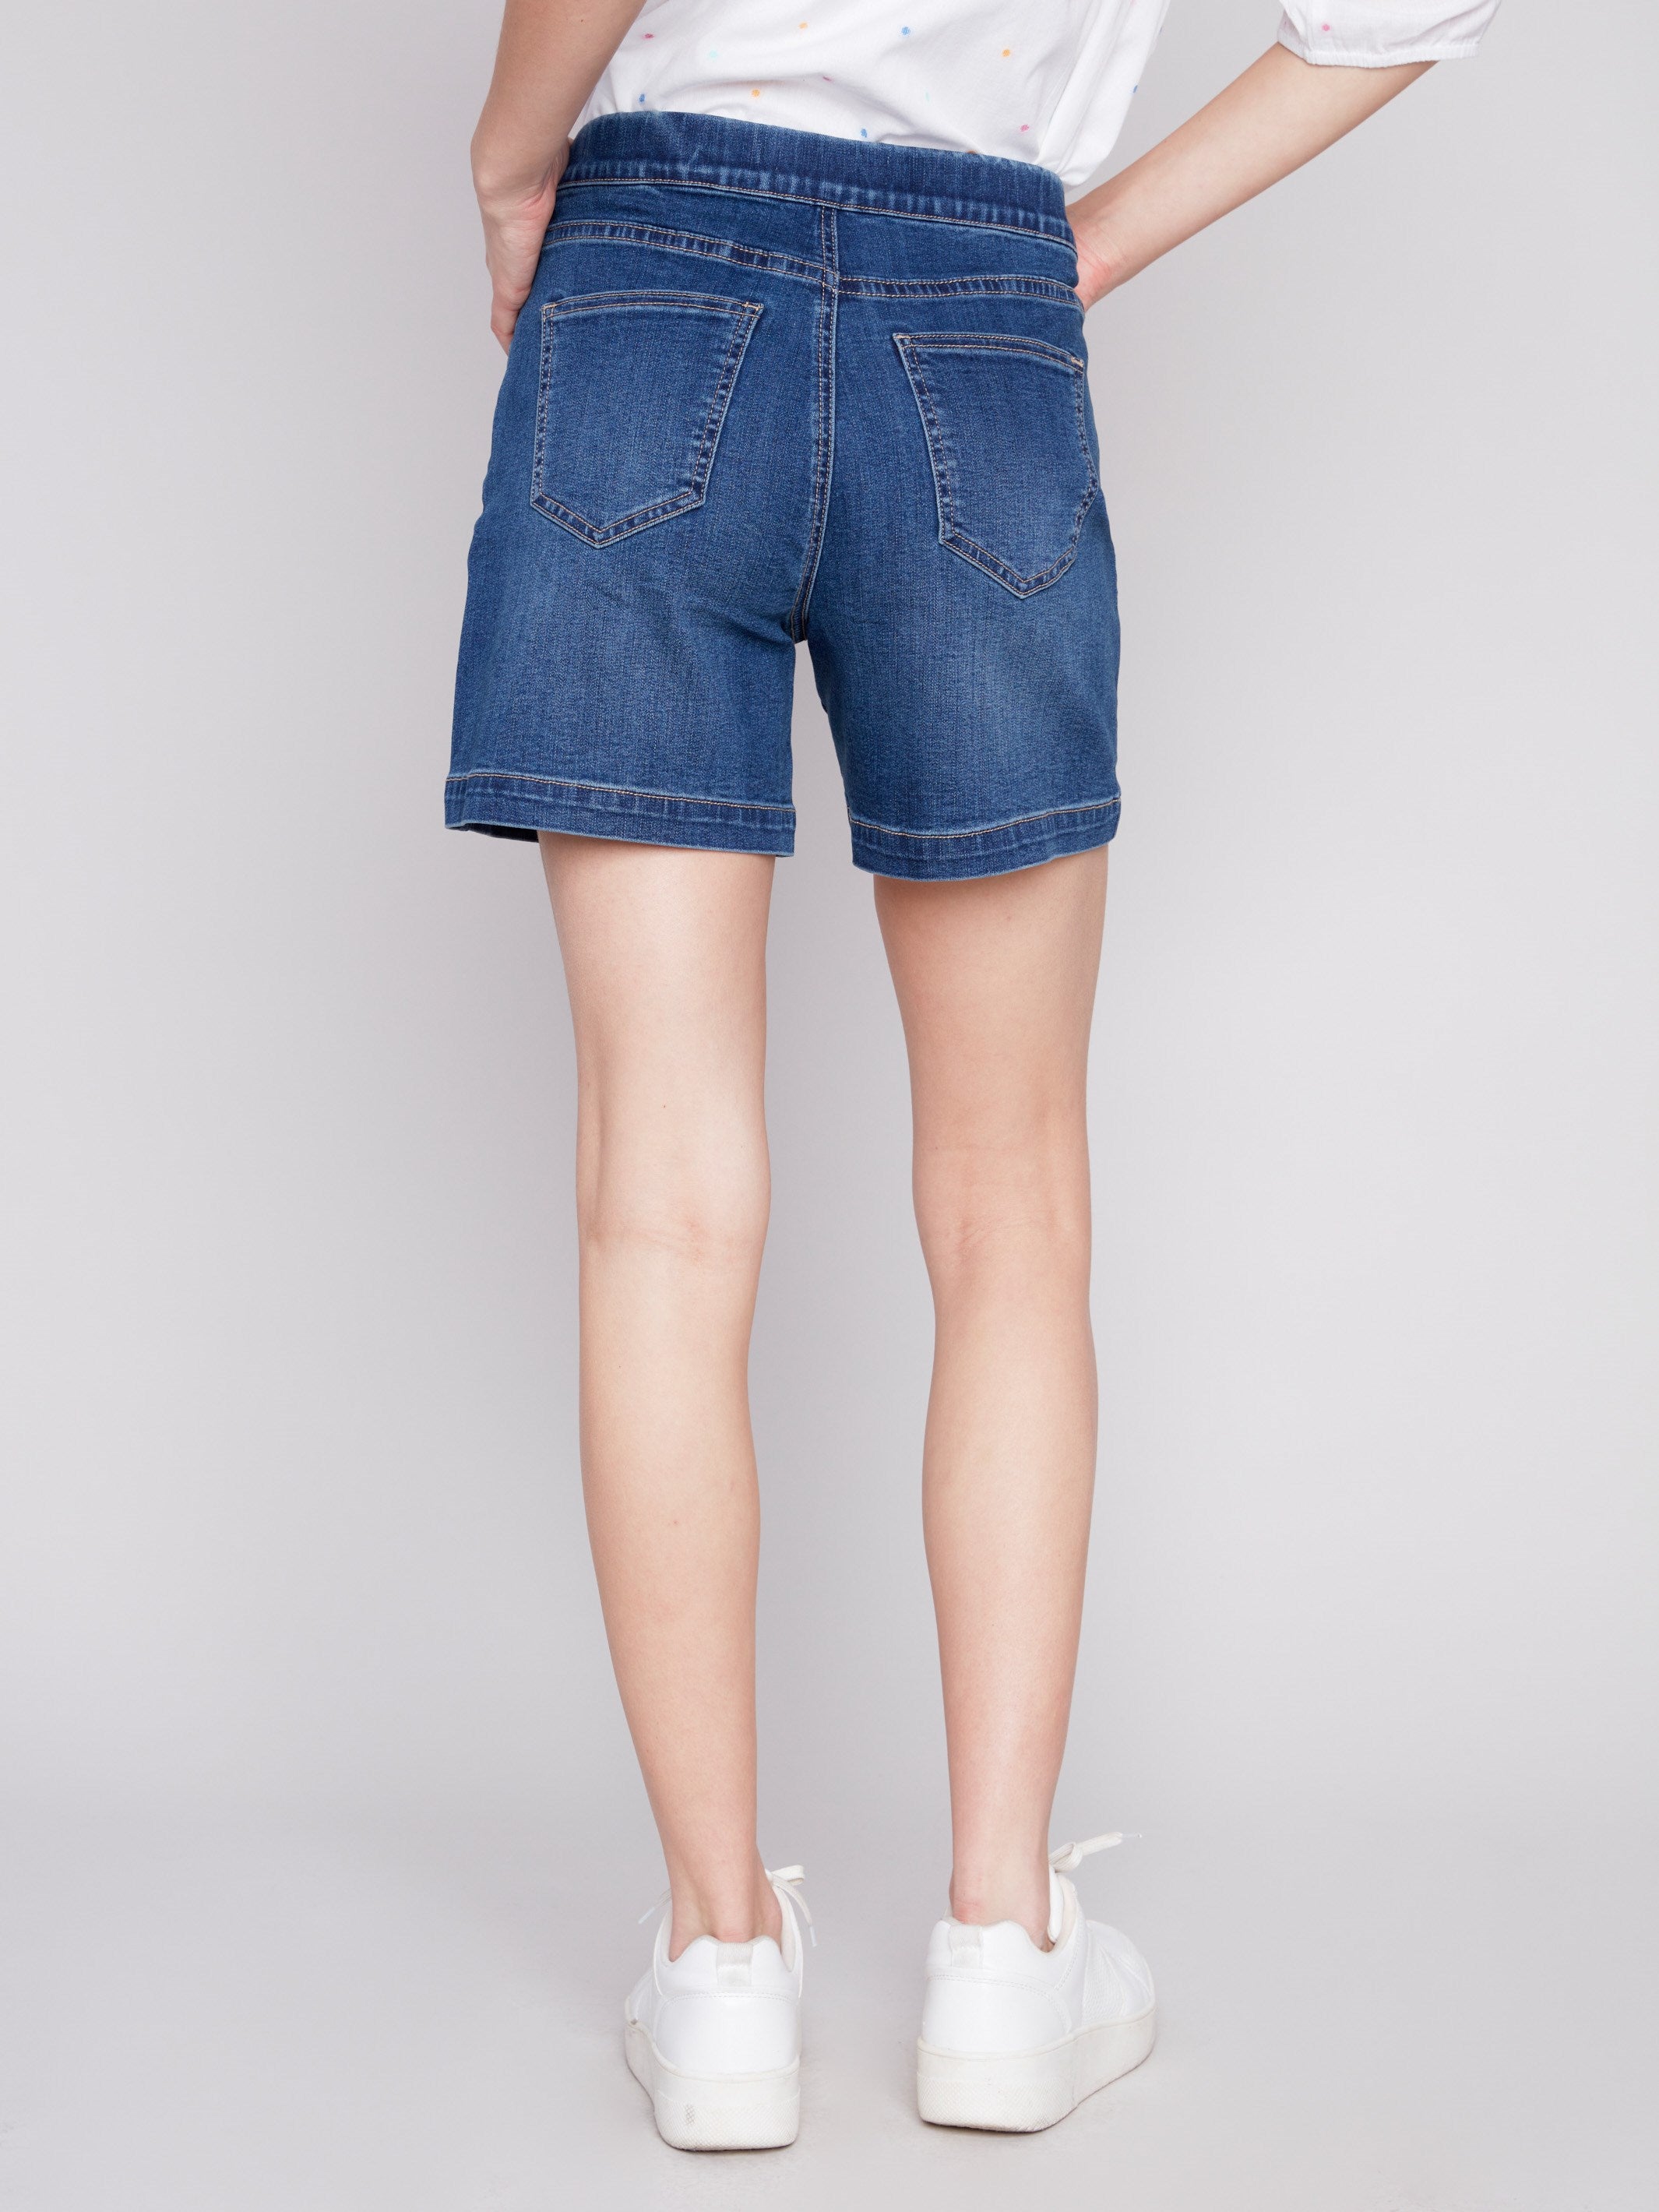 Denim Shorts with Decorative Buttons - Indigo - Charlie B Collection Canada - Image 4